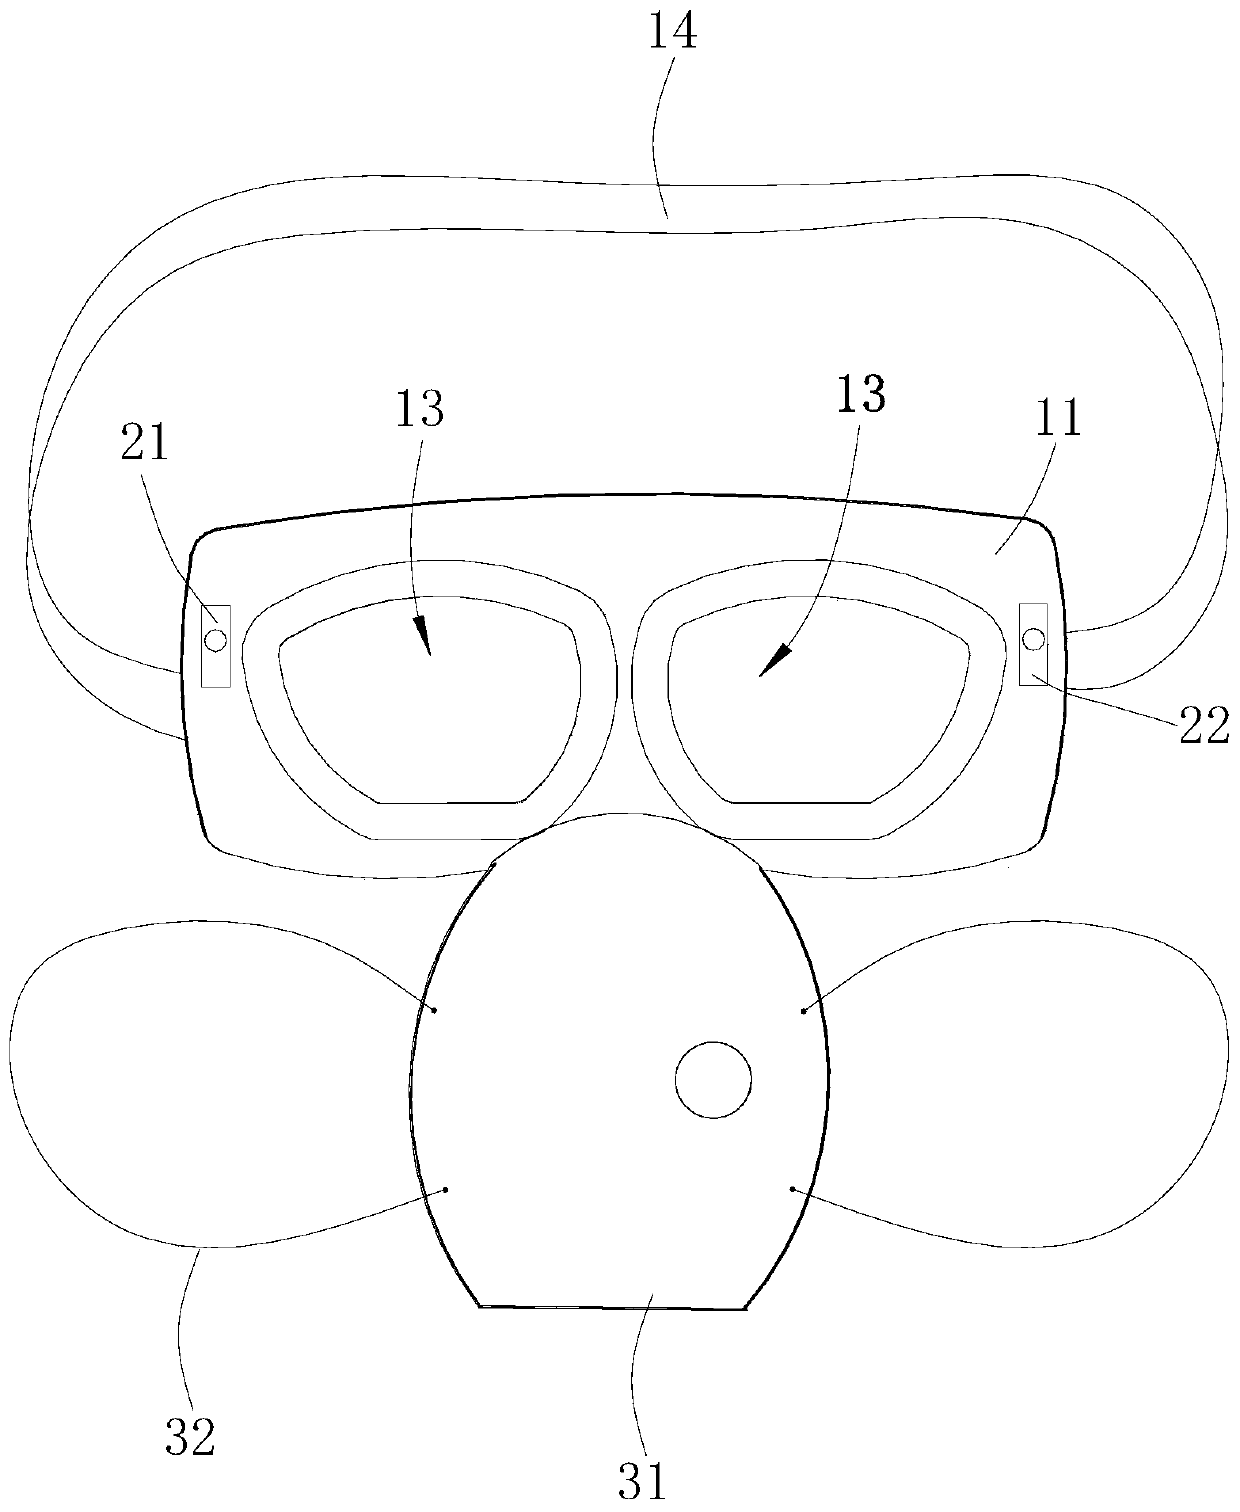 Folding human face protection device